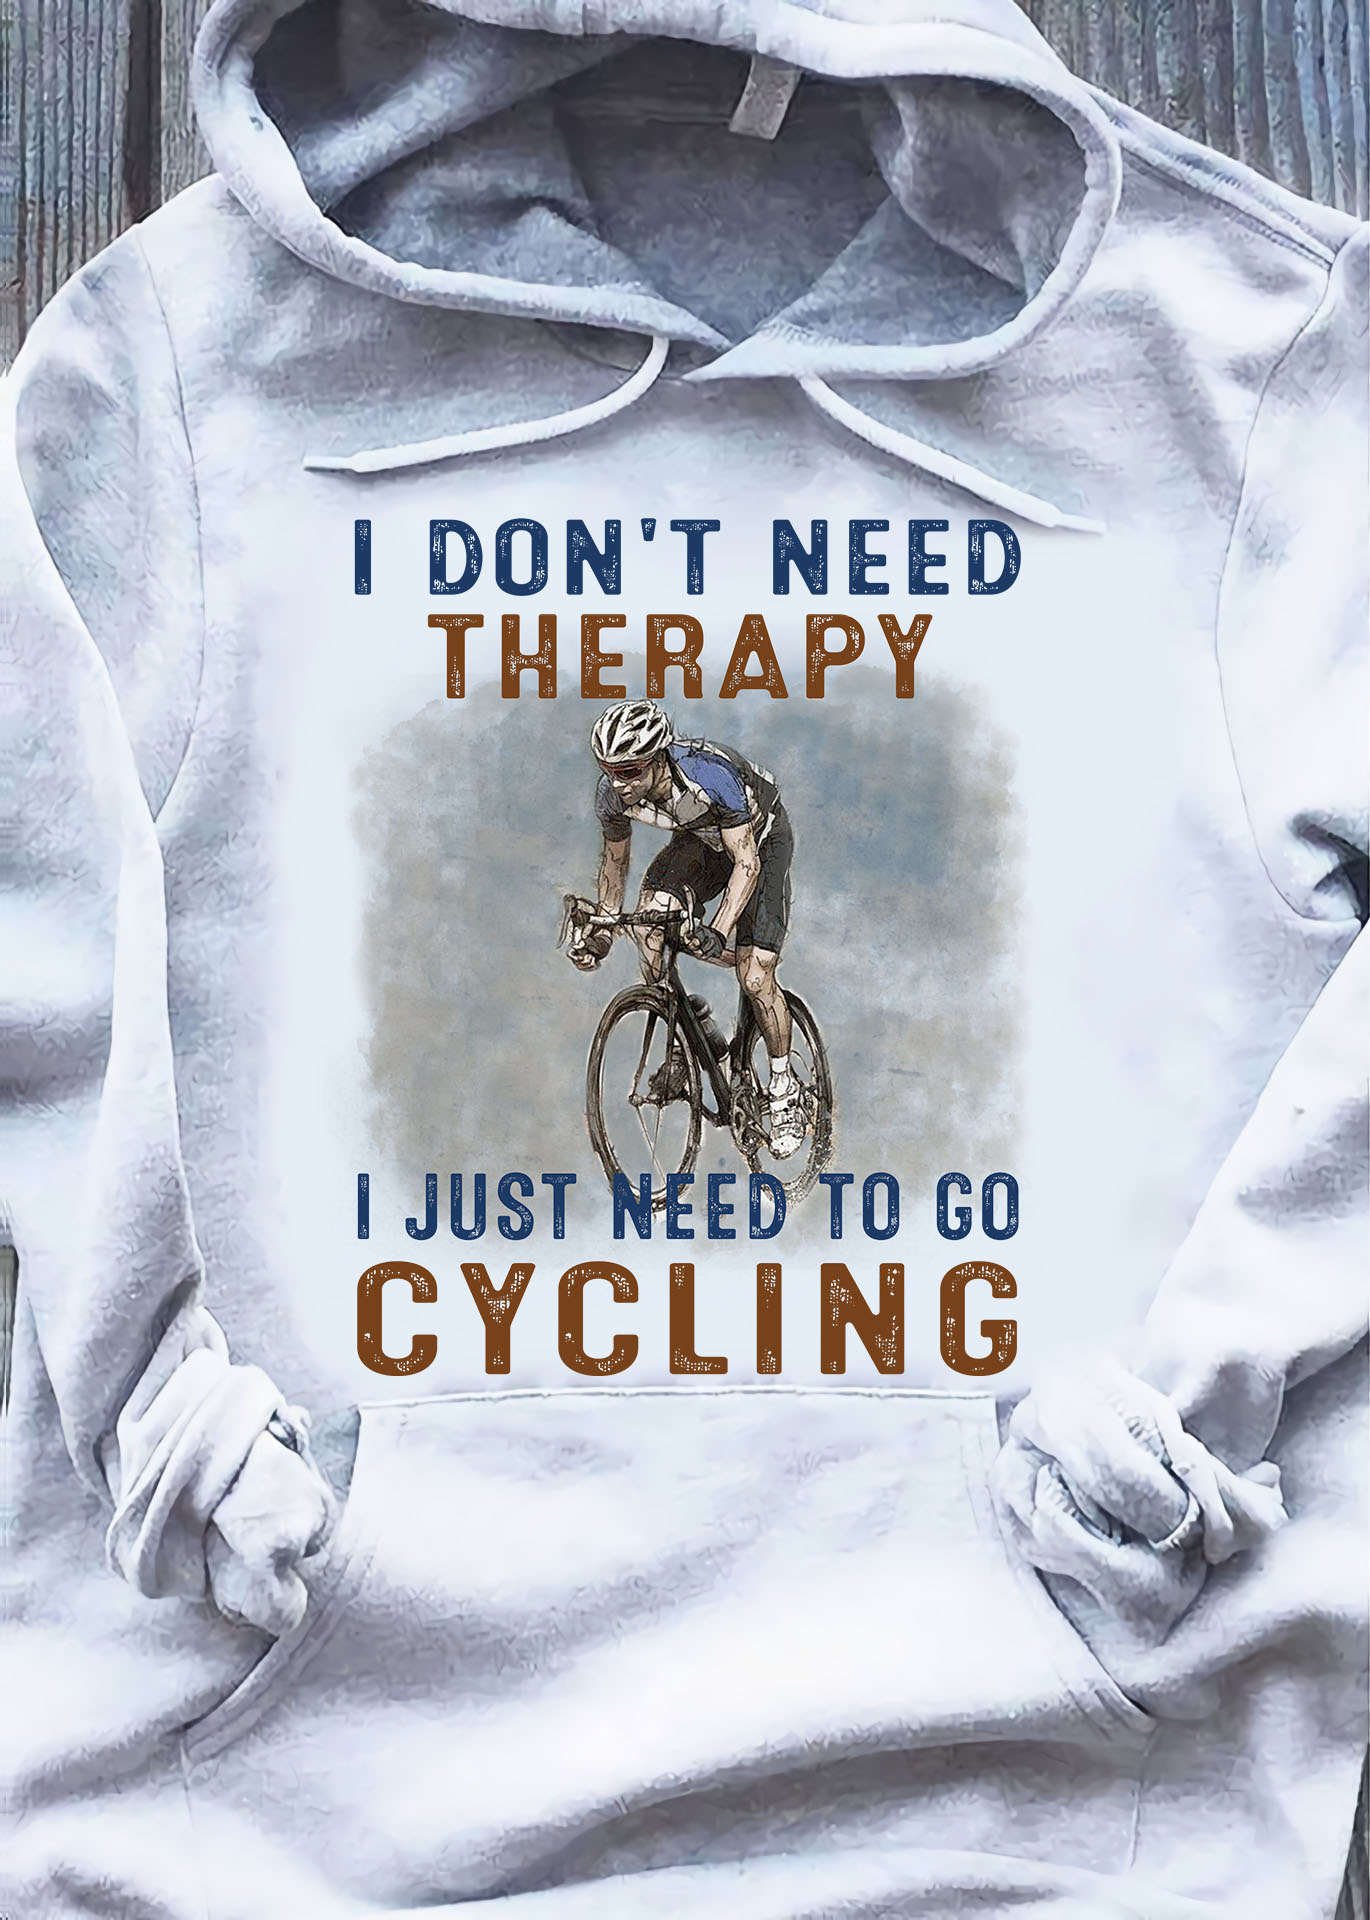 I don't need therapy I just need to go cycling